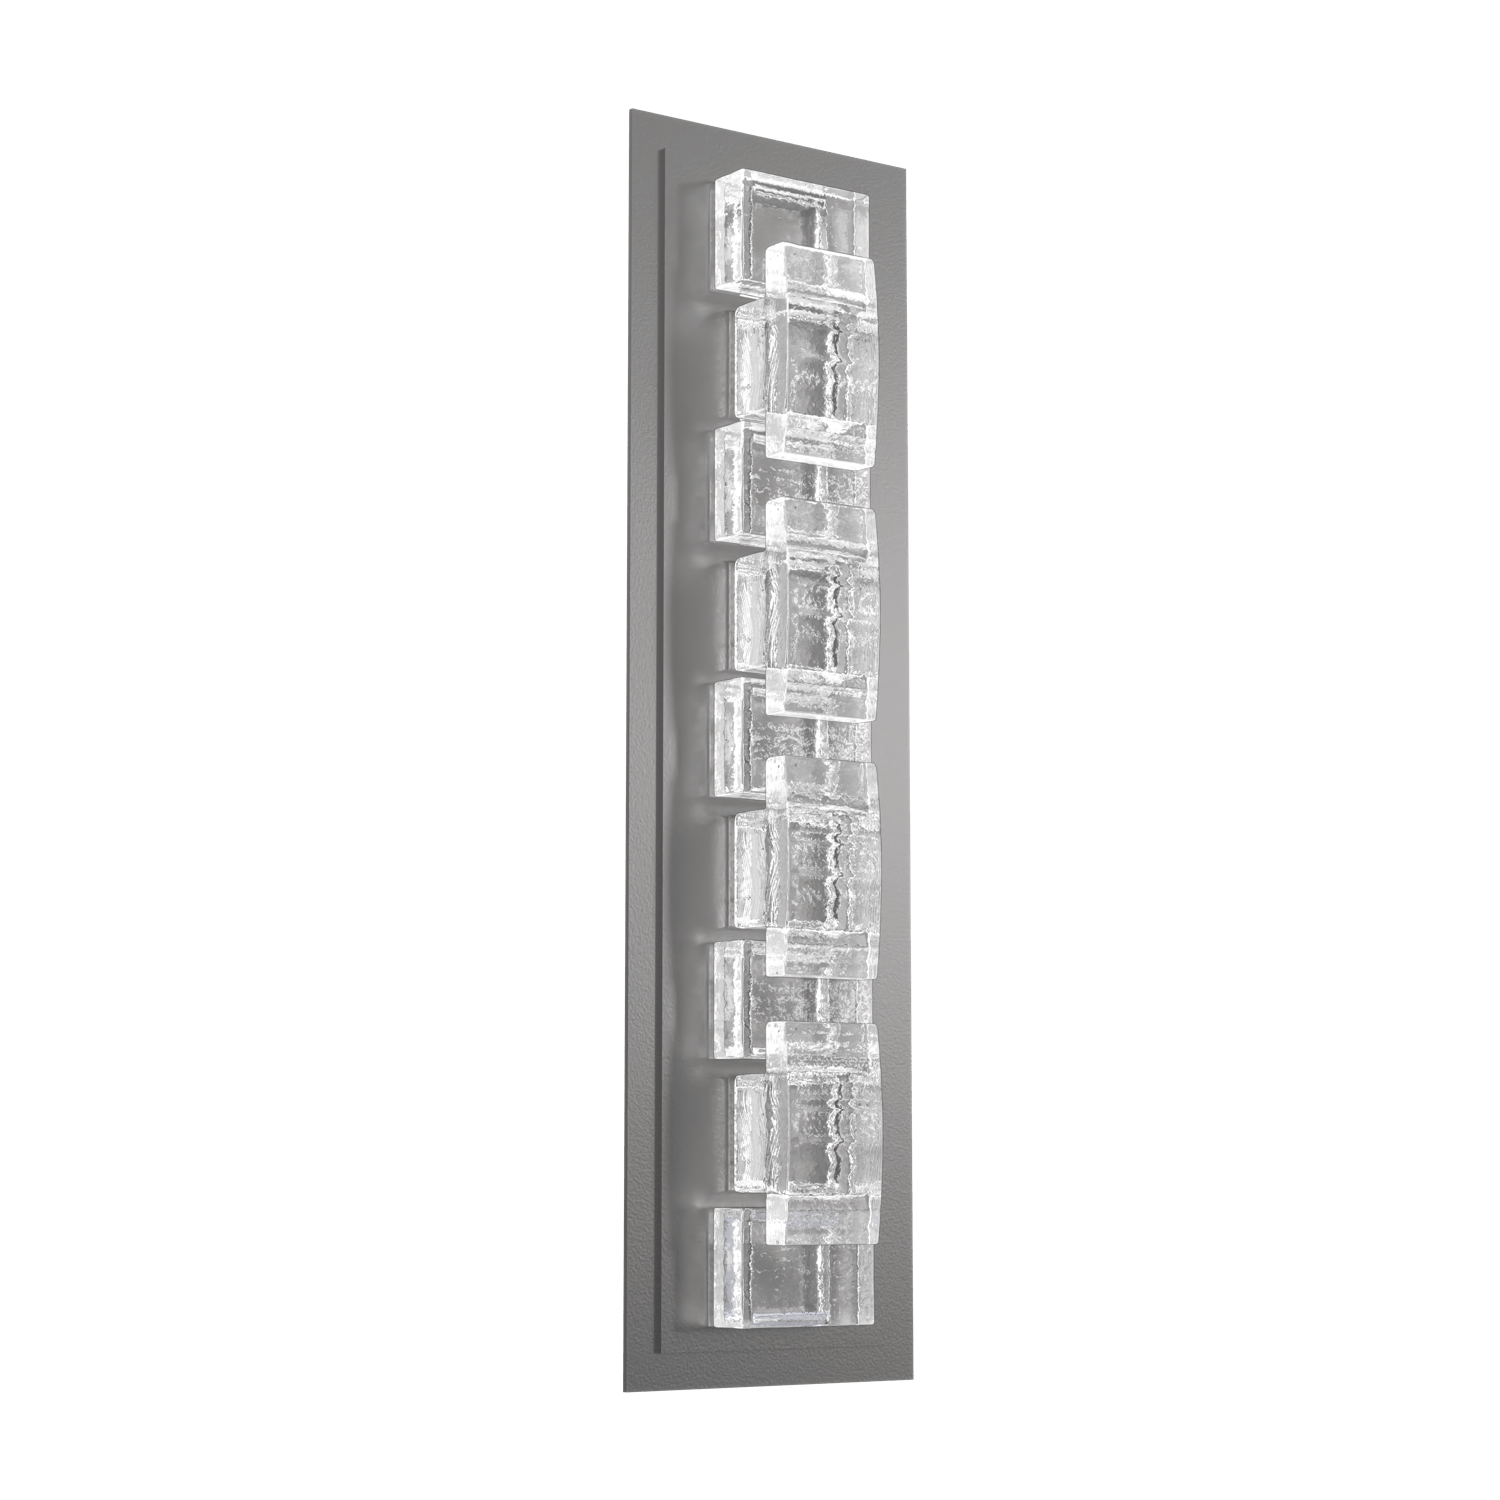 ODB0087-02-AG-TE-Hammerton-Studio-Tessera-28-inch-outdoor-sconce-with-argento-grey-finish-and-clear-tetro-cast-glass-shade-and-LED-lamping